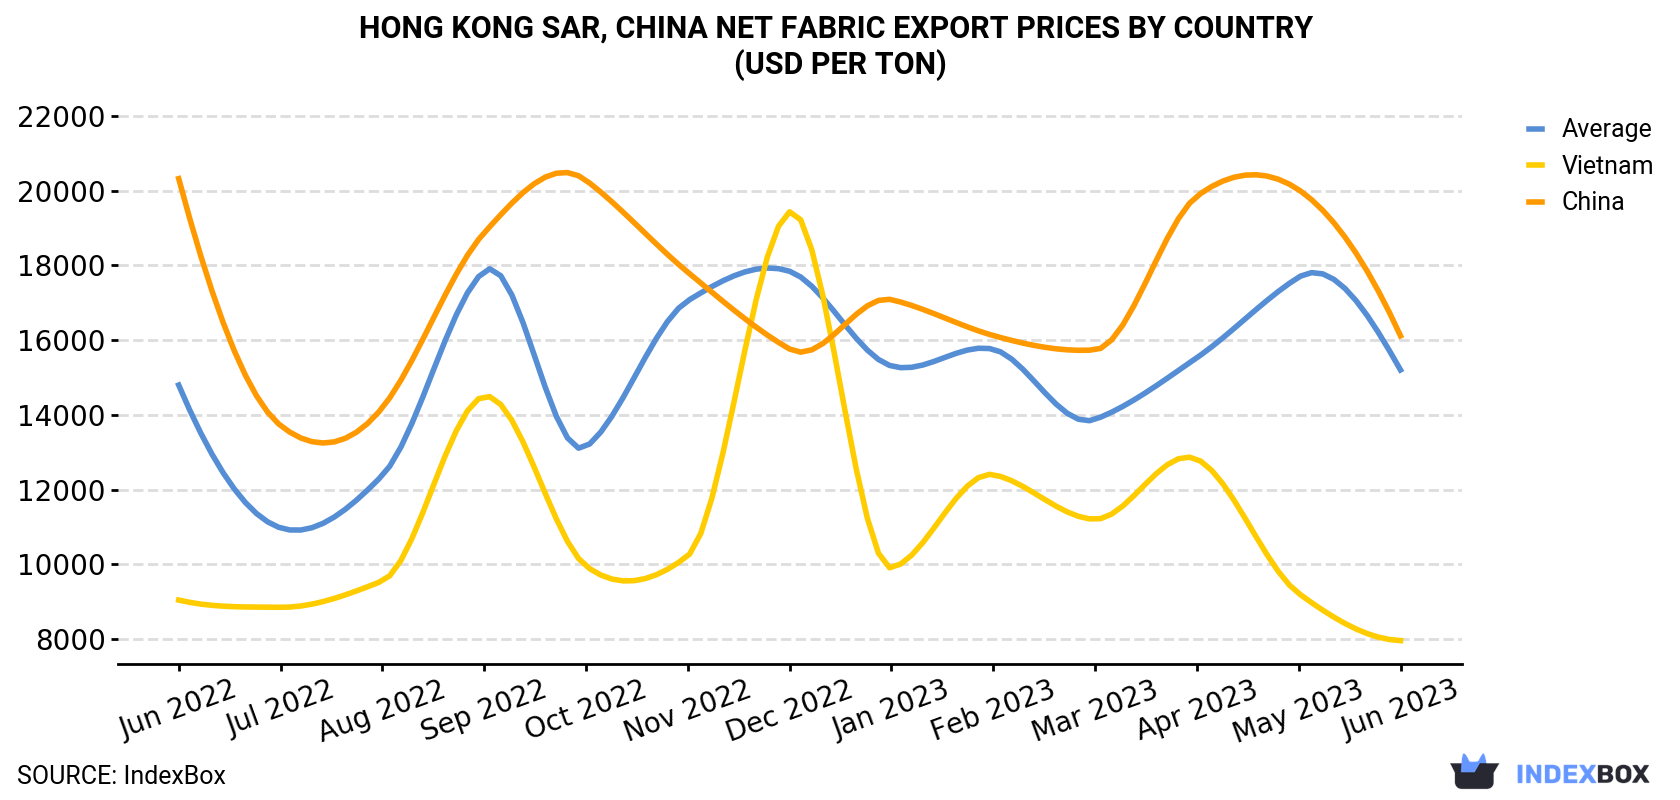 Hong Kong Net Fabric Export Prices By Country (USD Per Ton)